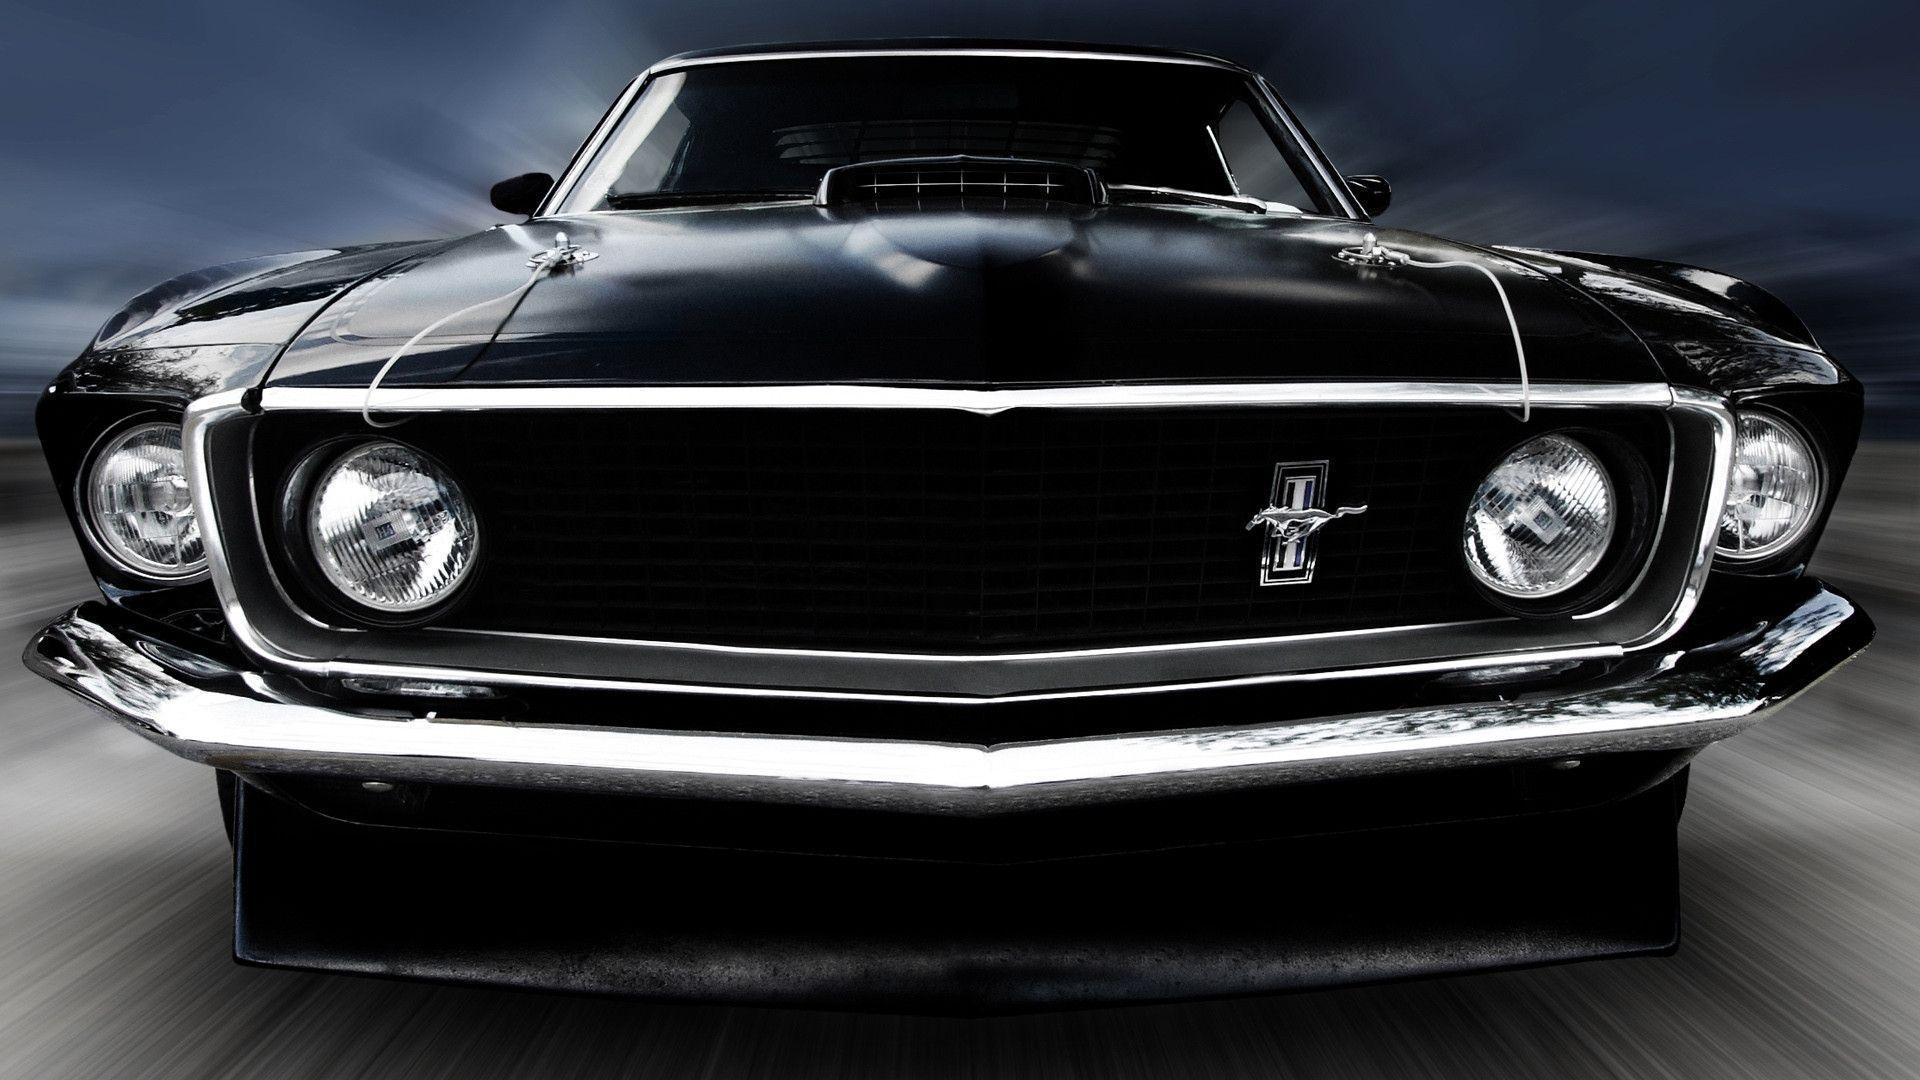 Classic car wallpaper for android. Wallpaper wide cars